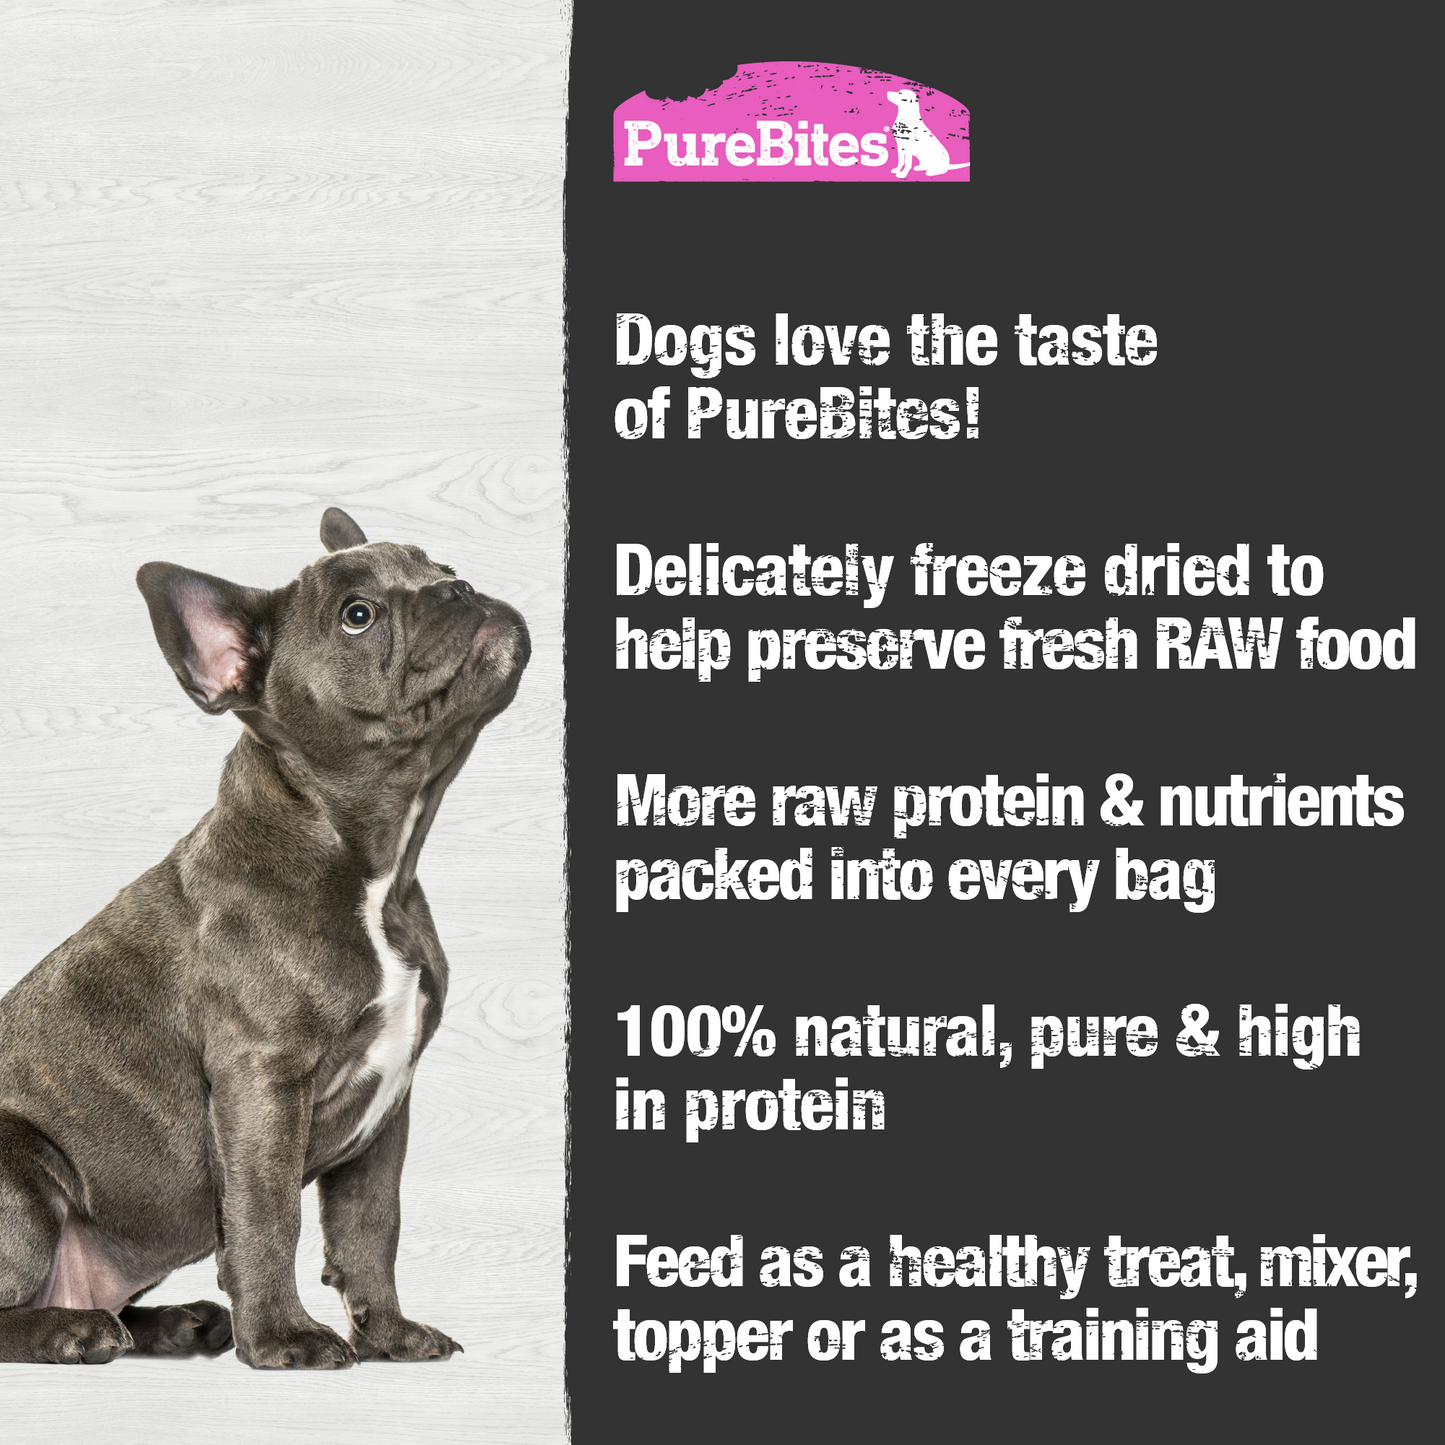 Made fresh & pure means more RAW protein and nutrients packed into every bag. Our sockeye salmon is freeze dried to help preserve its RAW taste, and nutrition, and mirror a dog’s ancestral diet